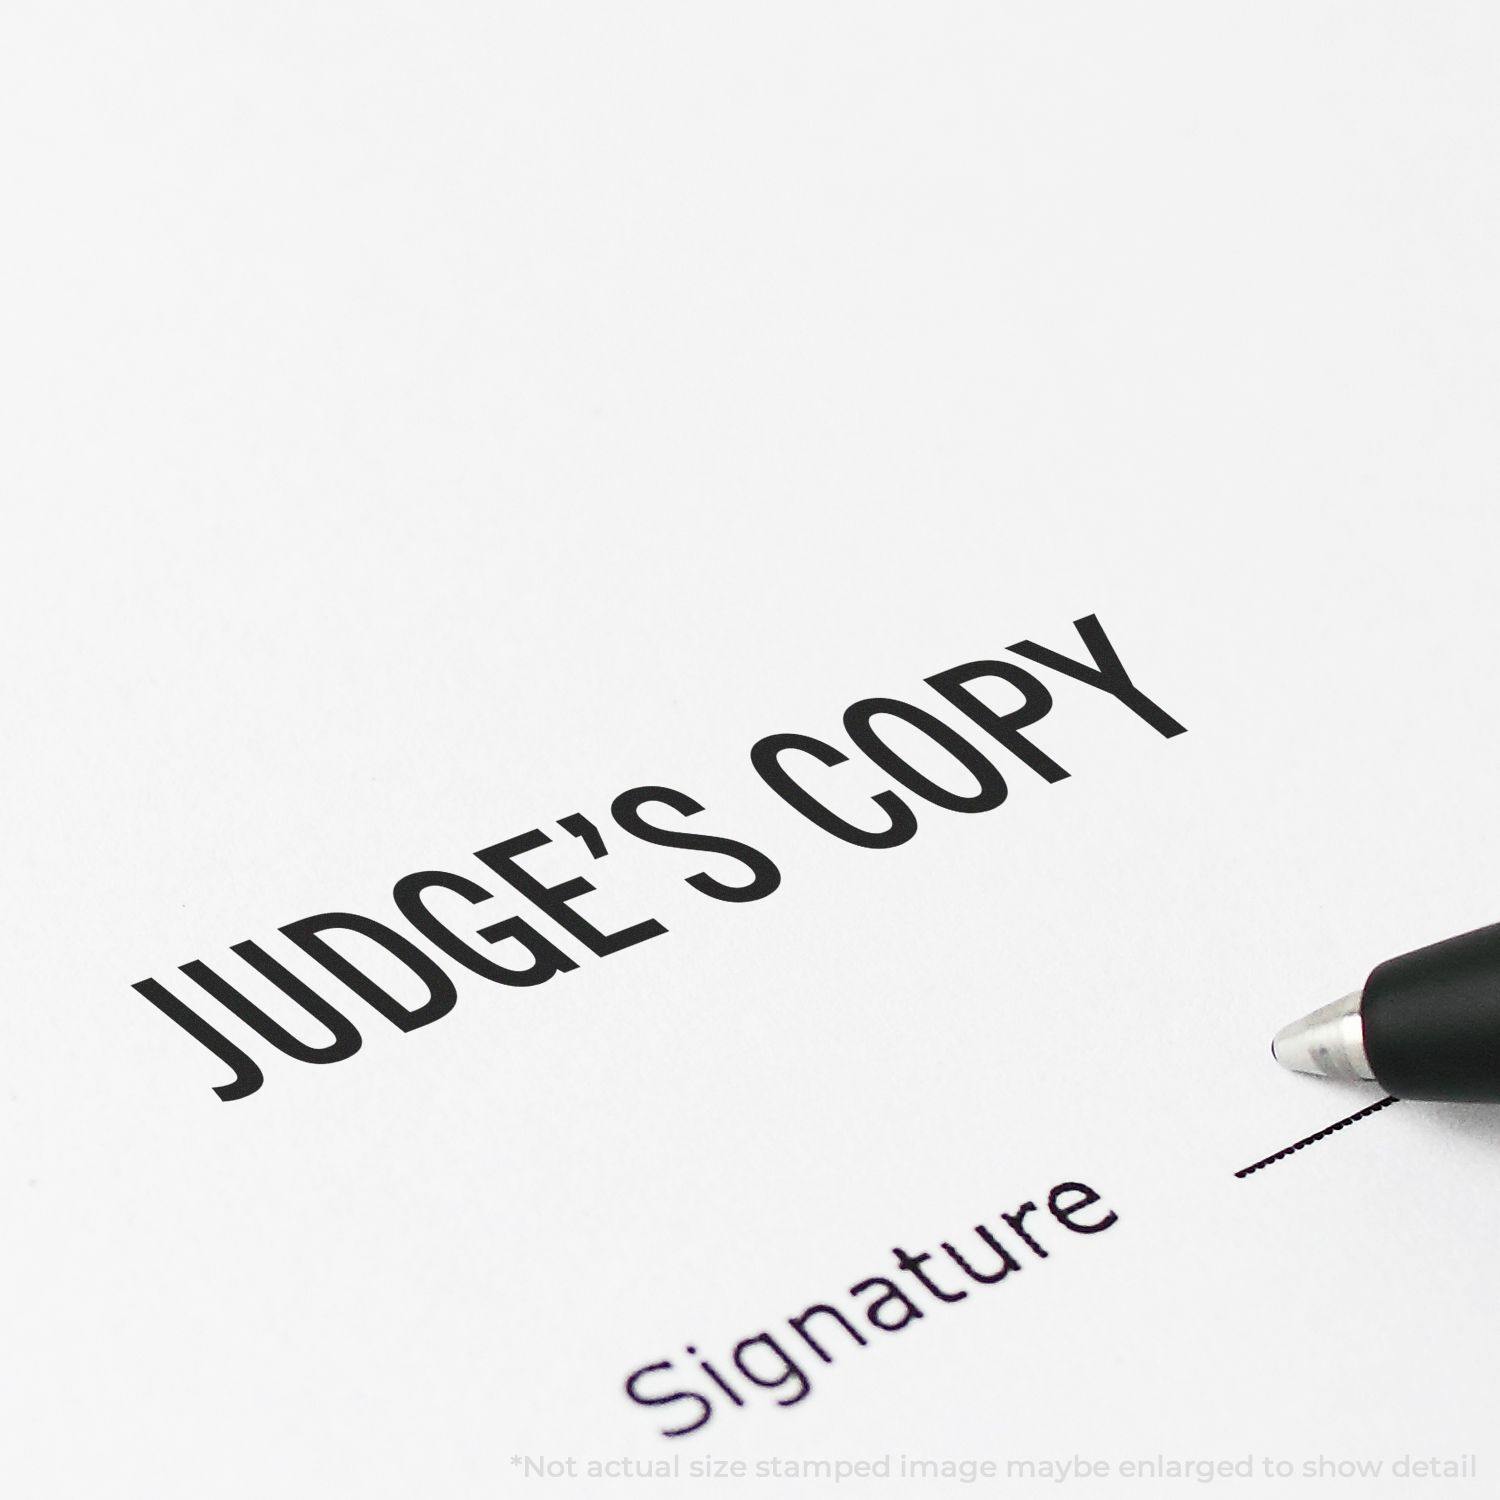 In Use Large Judge's Copy Rubber Stamp Image